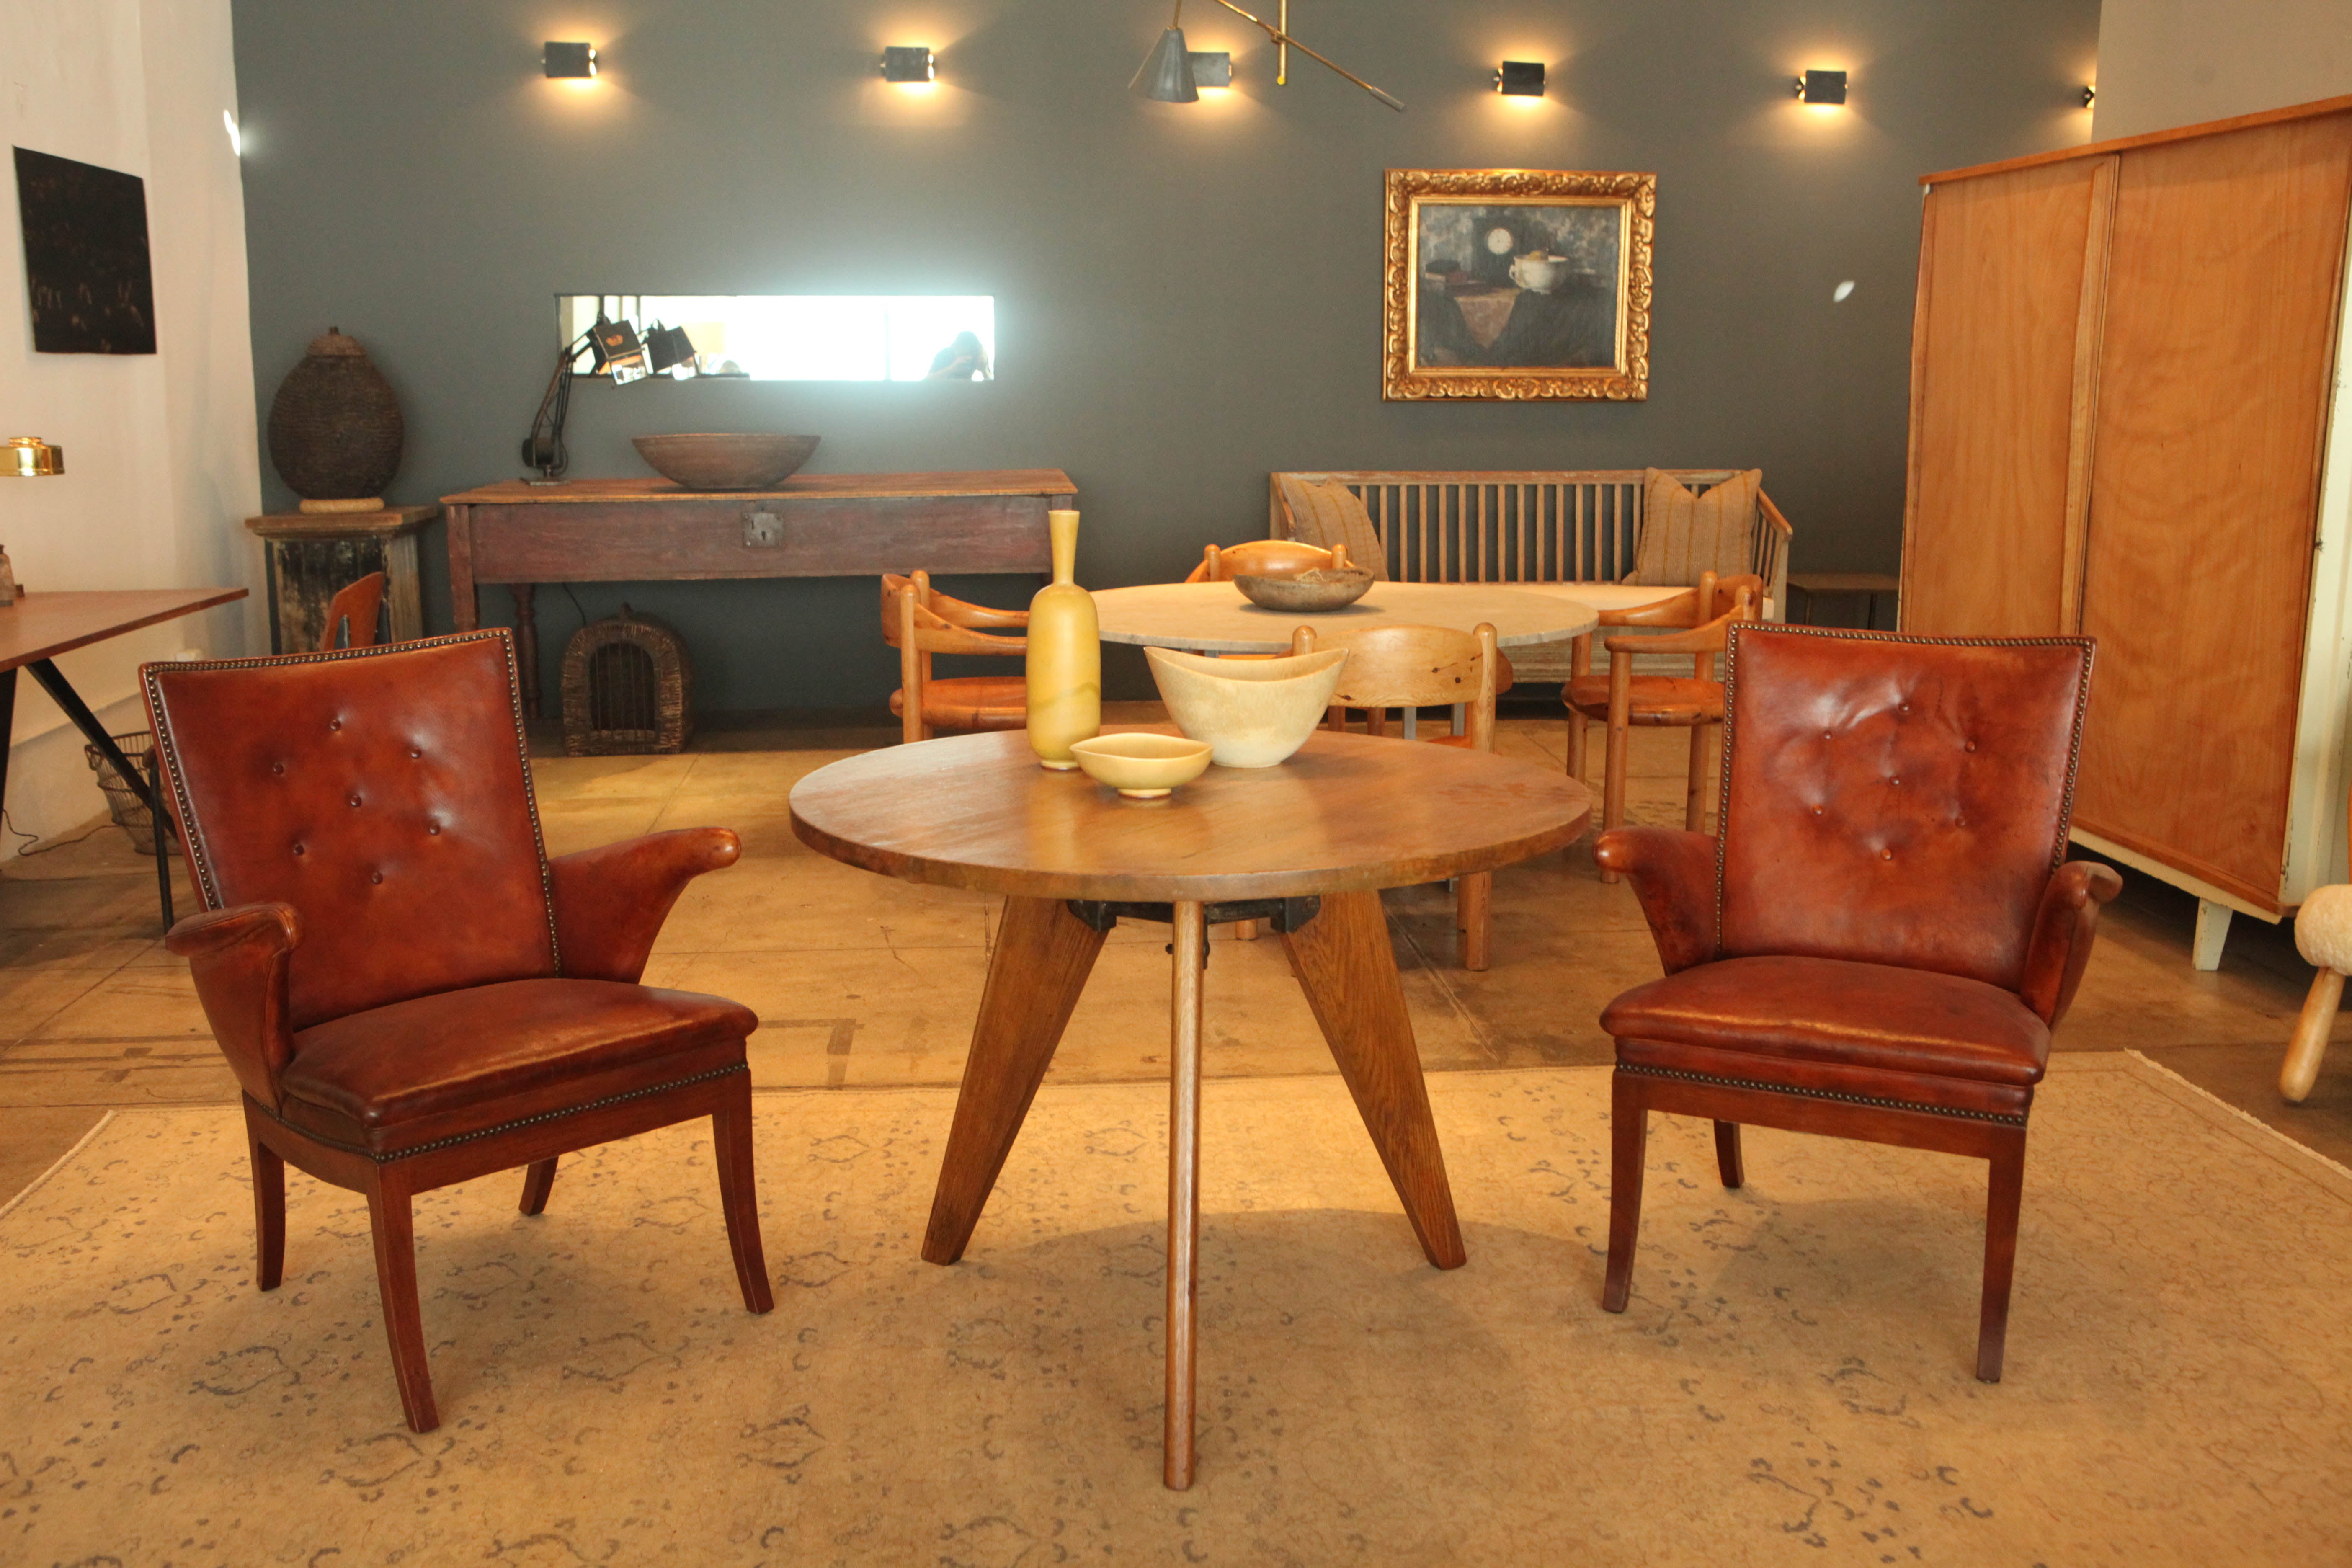 A pair of deep cognac armchairs by Frits Henningsen in original condition.
Sold only as a pair.
              